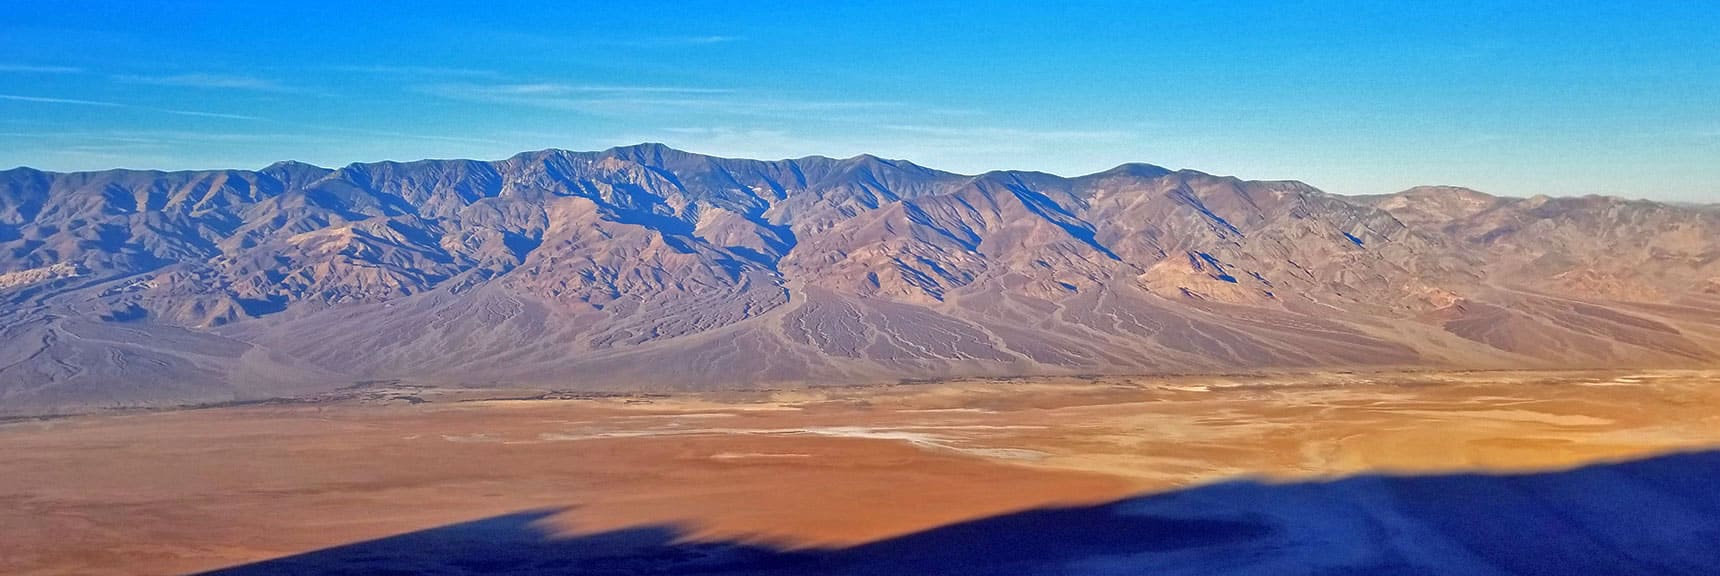 Dantes View to Mt. Perry| Death Valley National Park, California